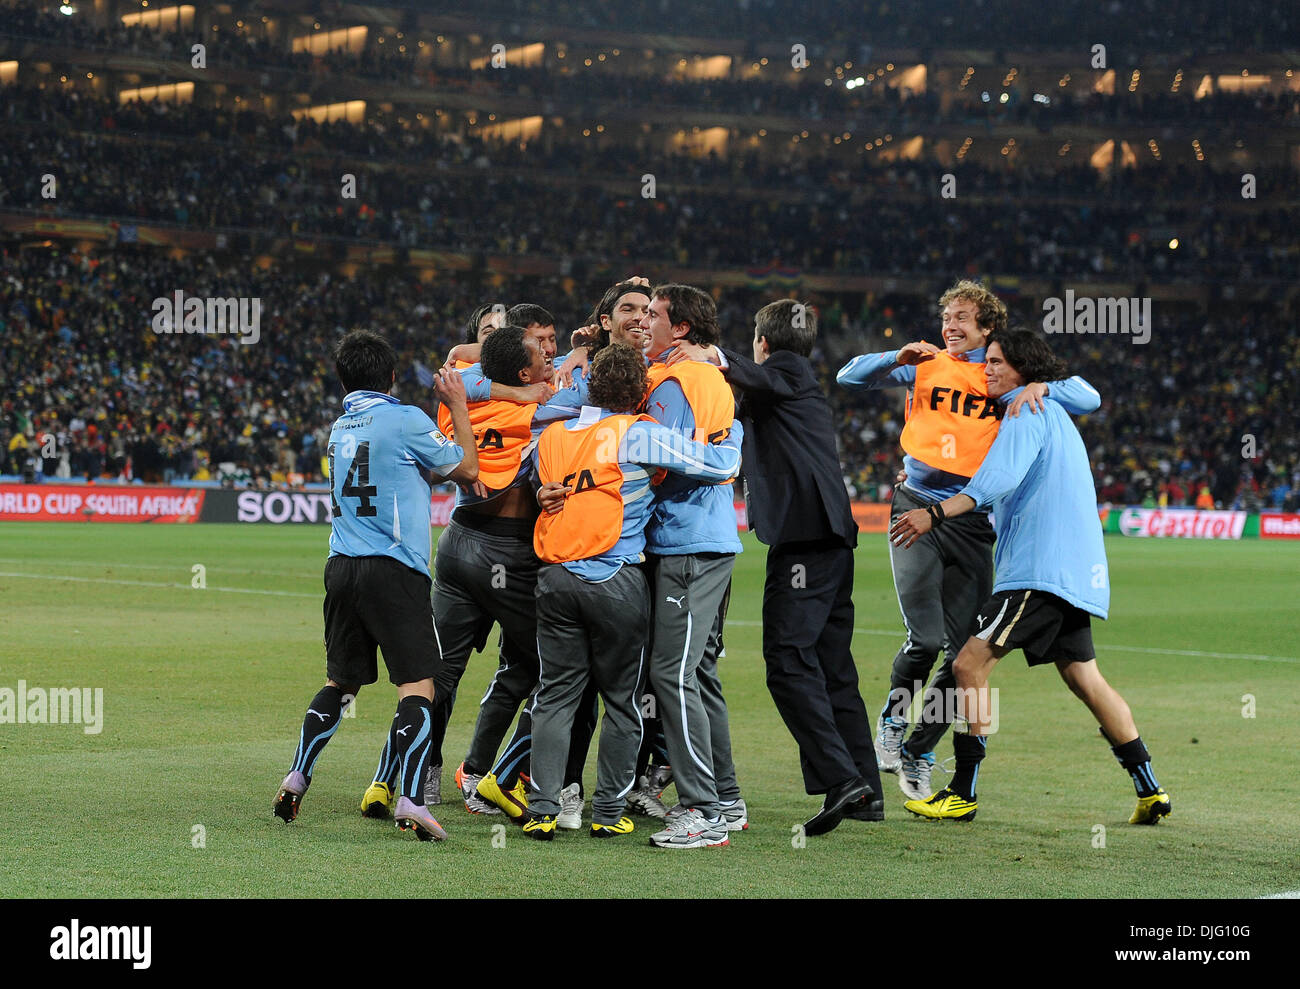 July 02, 2010 - Johannesburg, South Africa - Sebastian Abreu of Uruguay celebrates scoring the winning penalty with team mates during the 2010 FIFA World Cup Quarter Final soccer match between Uruguay and Ghana at Soccer City Stadium on June 02, 2010 in Johannesburg, South Africa. (Credit Image: © Luca Ghidoni/ZUMApress.com) Stock Photo